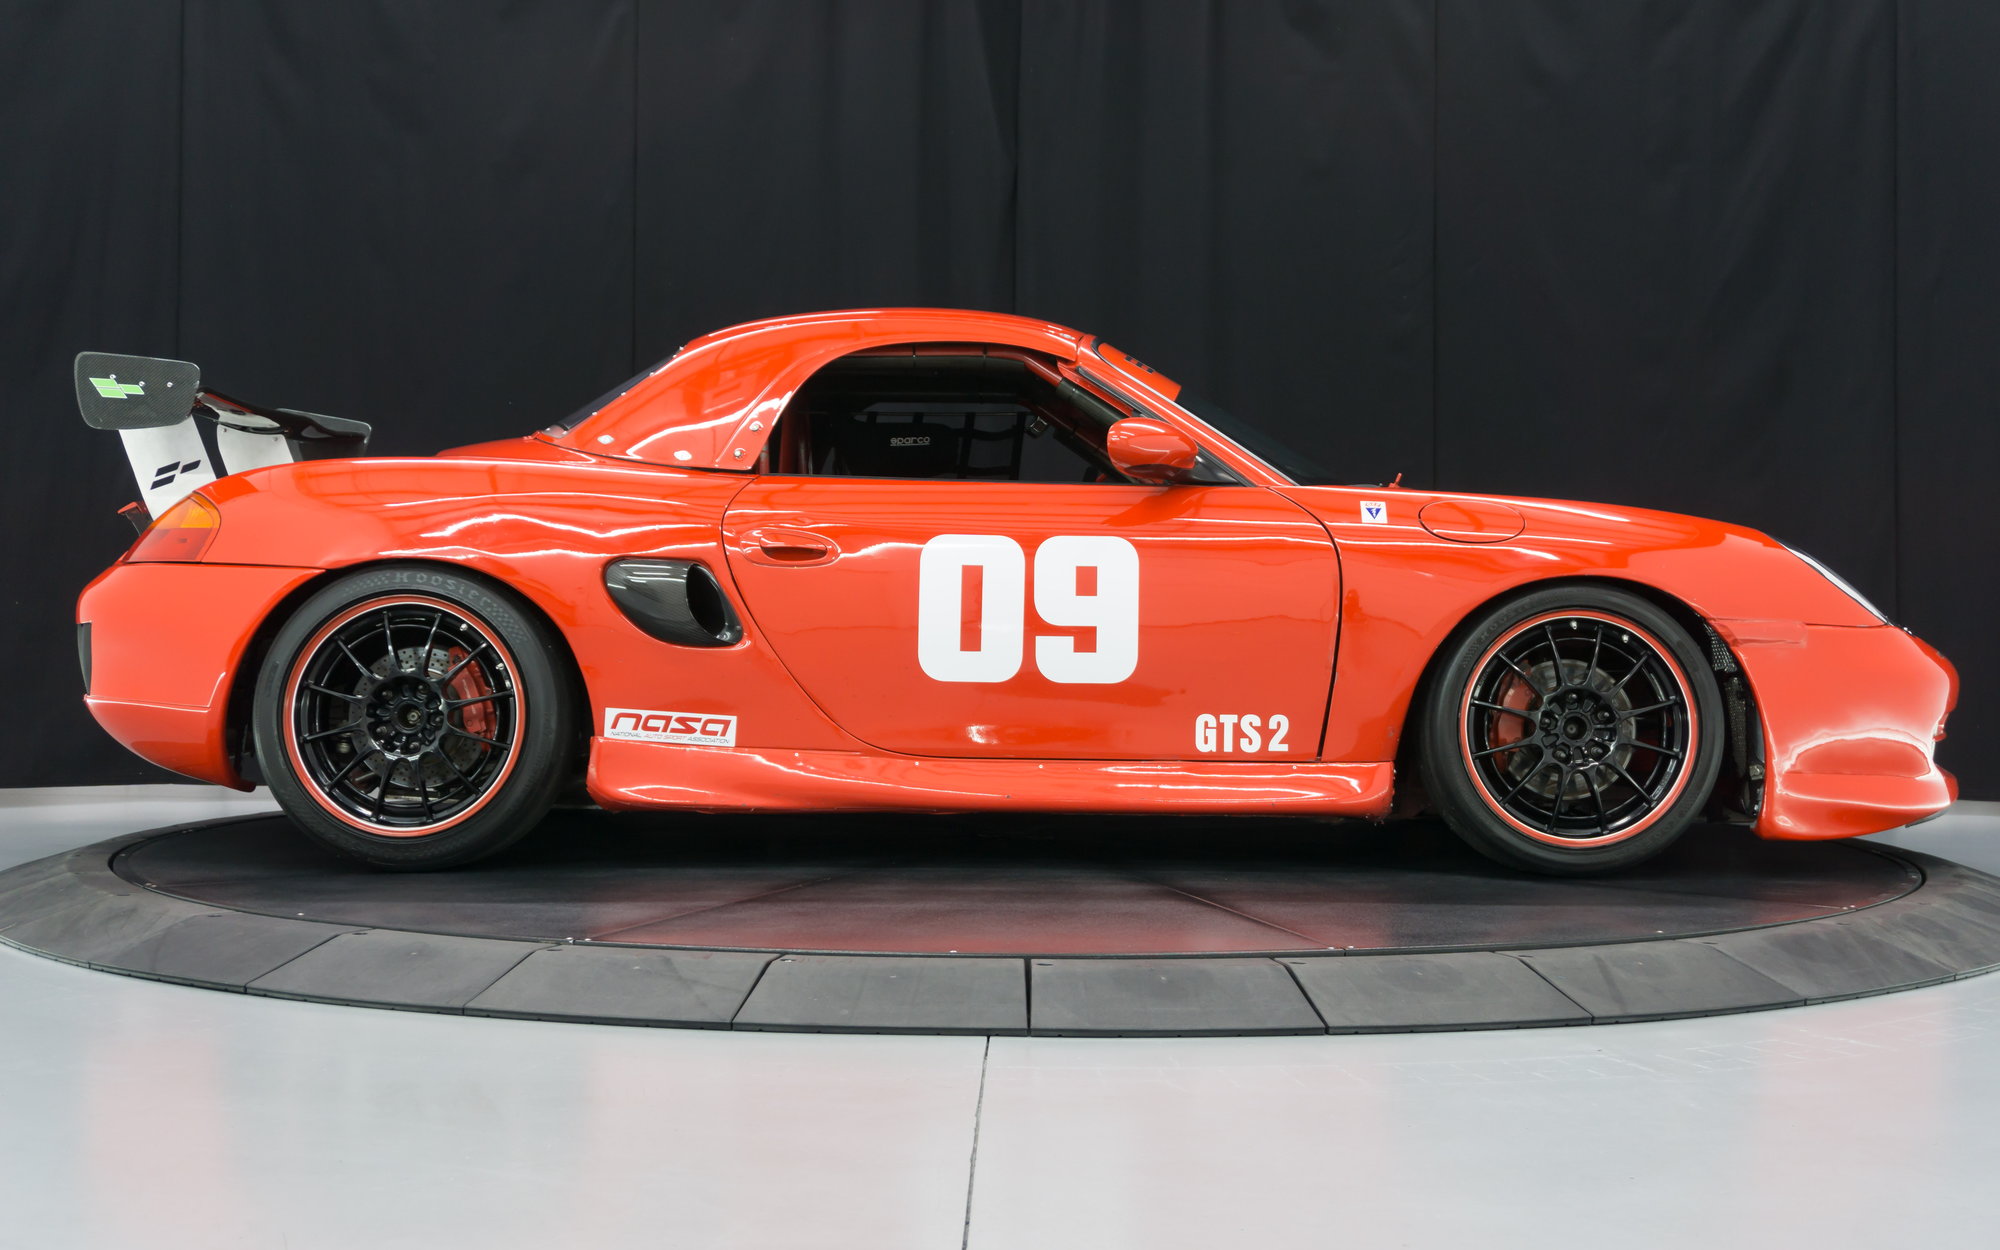 1998 Porsche Boxster - 1998 Porsche Boxster 3.2L Race Car---NASA GTS2 Class---Multiple Track Records - Used - VIN WP0CA2989WU620636 - 6 cyl - 2WD - Manual - Convertible - Red - Sandy, UT 84070, United States